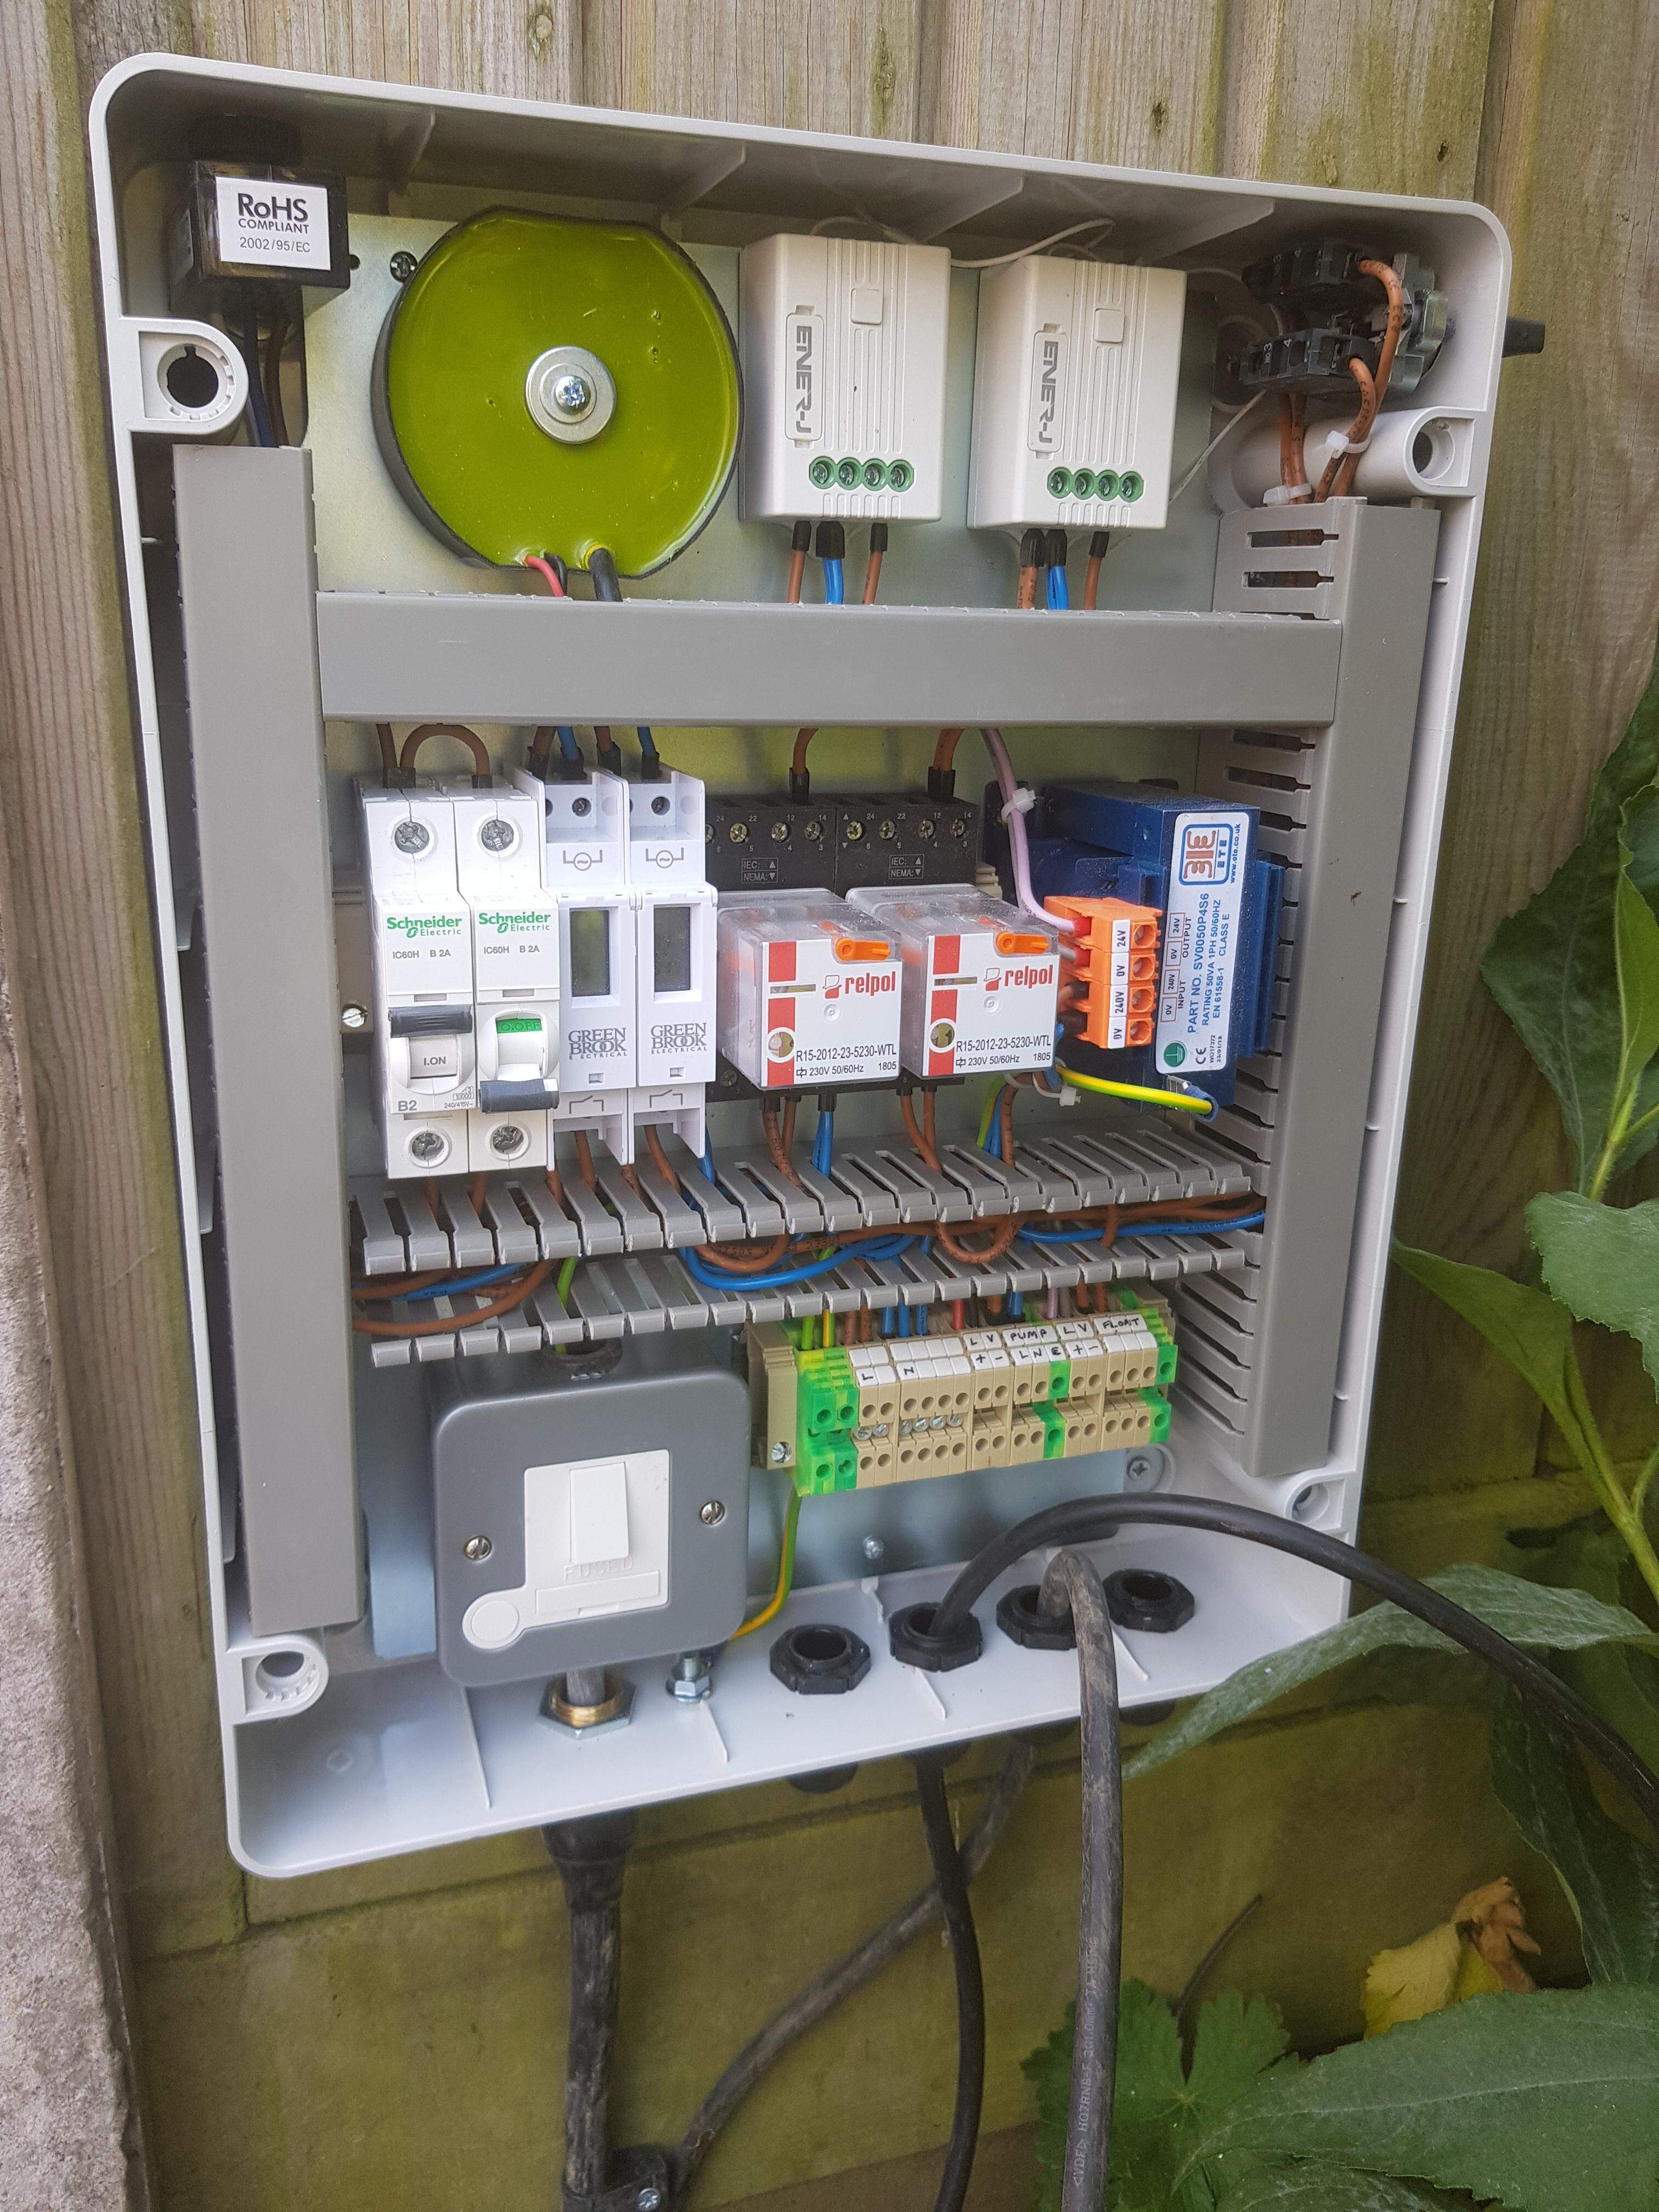 Garden lighting and pond wiring panel using photocell, timer and RF switching control